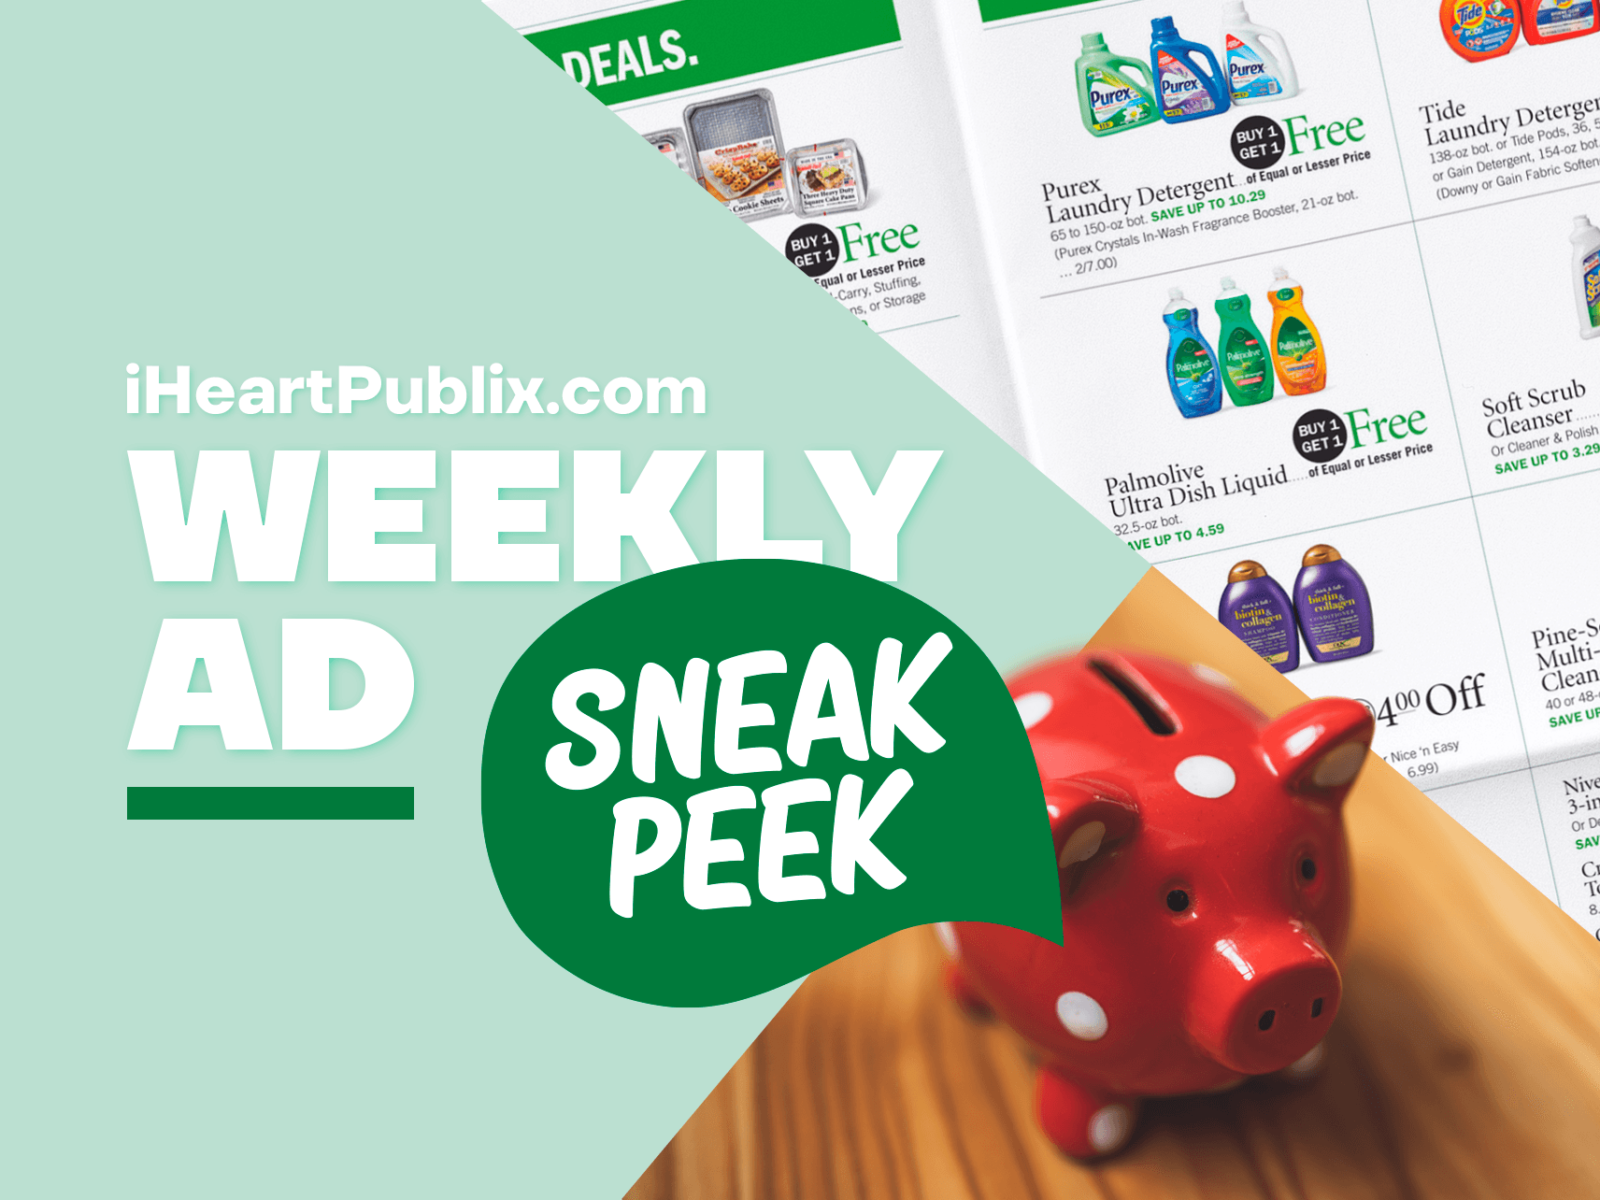 Publix Ad & Coupons Week Of 12/8 to 12/14 (12/7 to 12/13 For Some)